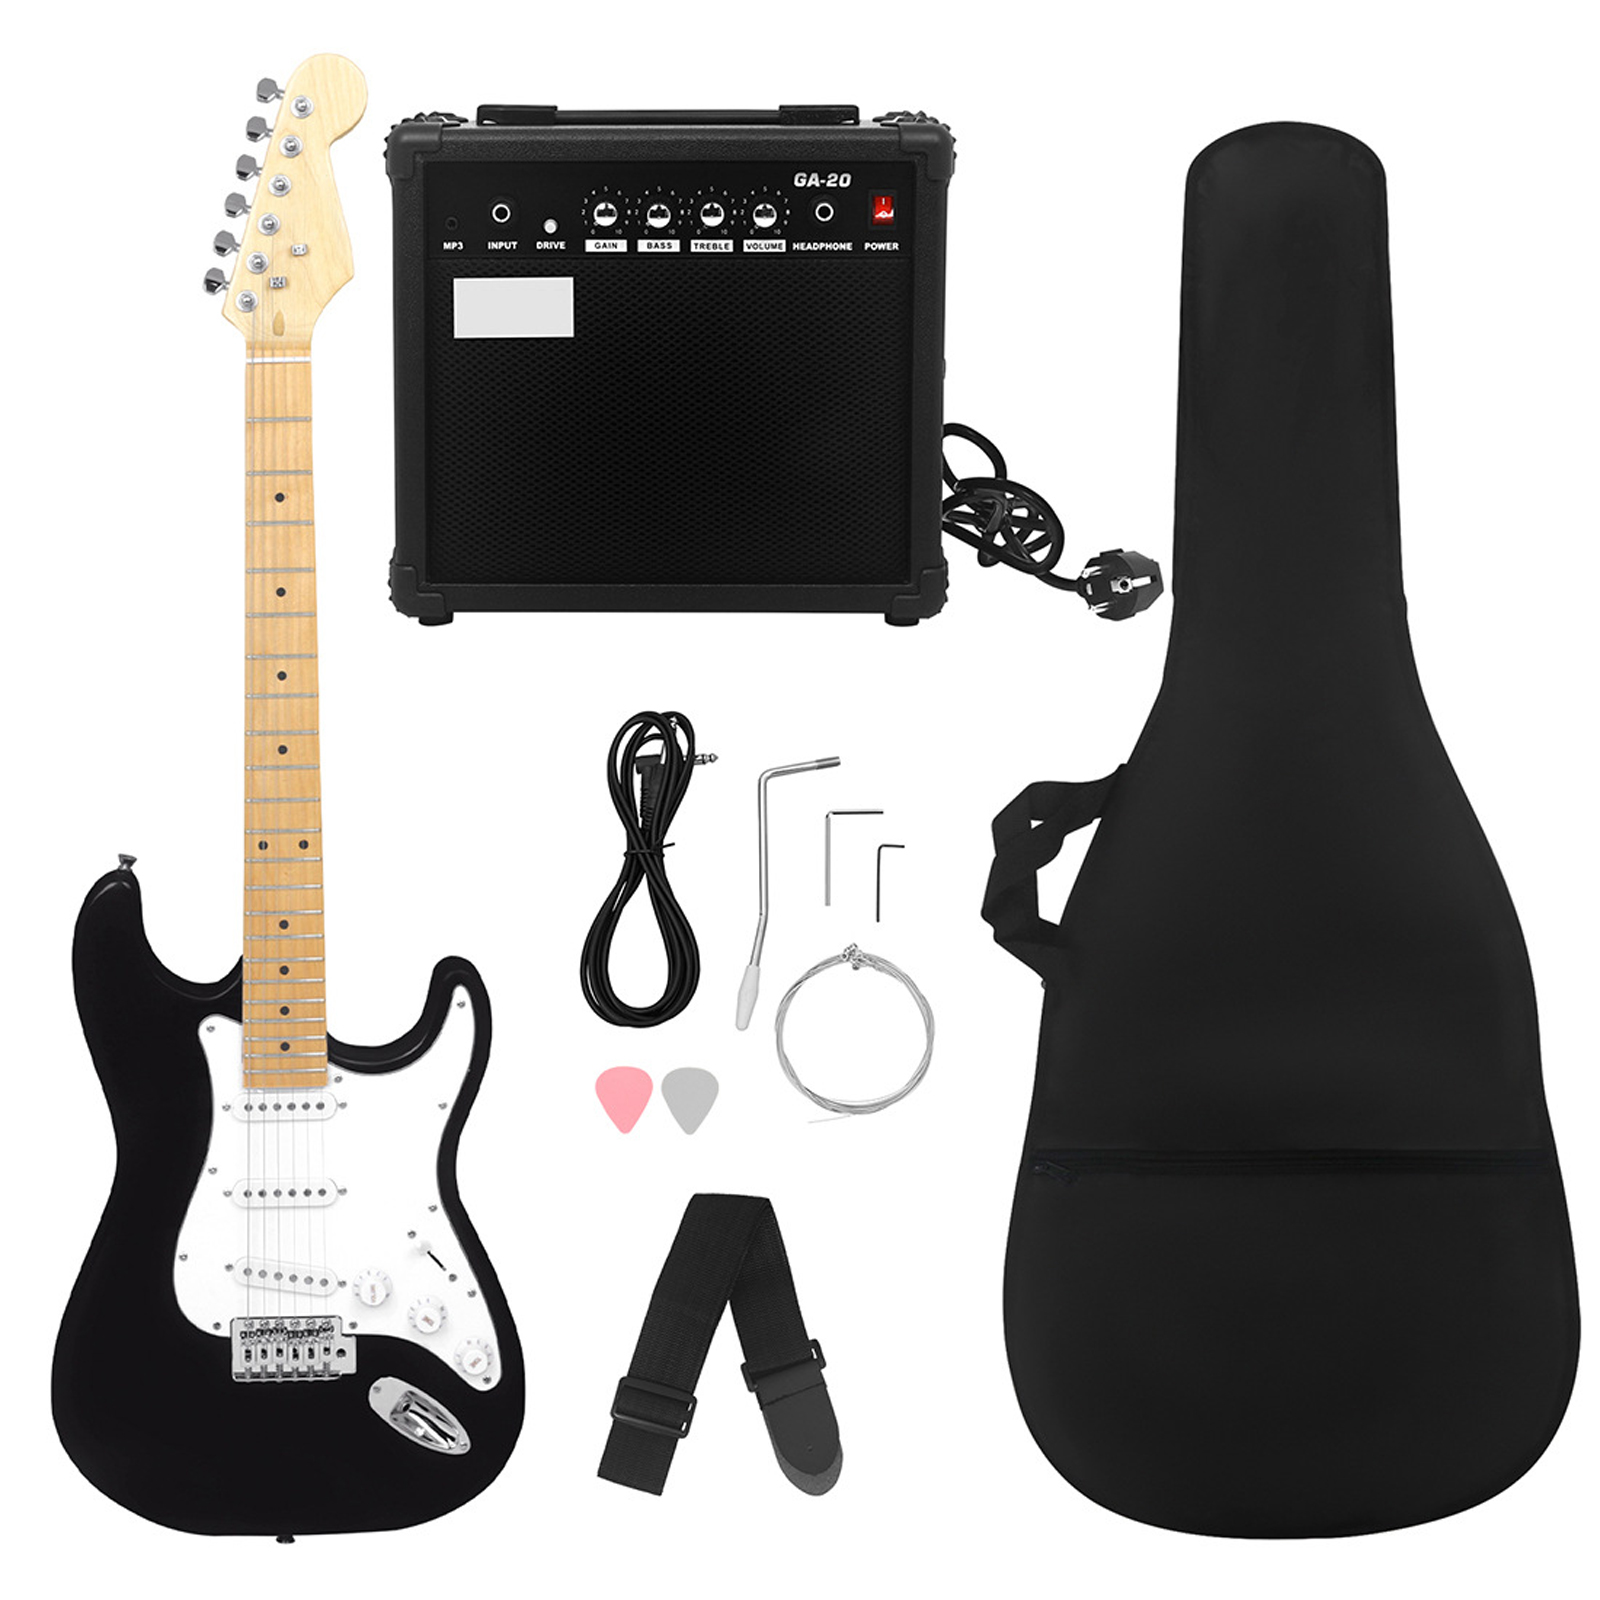 Electric Guitar Beginner Kit Full Size Maple Fingerboard Electric Guitar Accessories With Audio Picks Strap Guitar Bag Strings Cable Rocker Wrench Sunset Black Edge Set